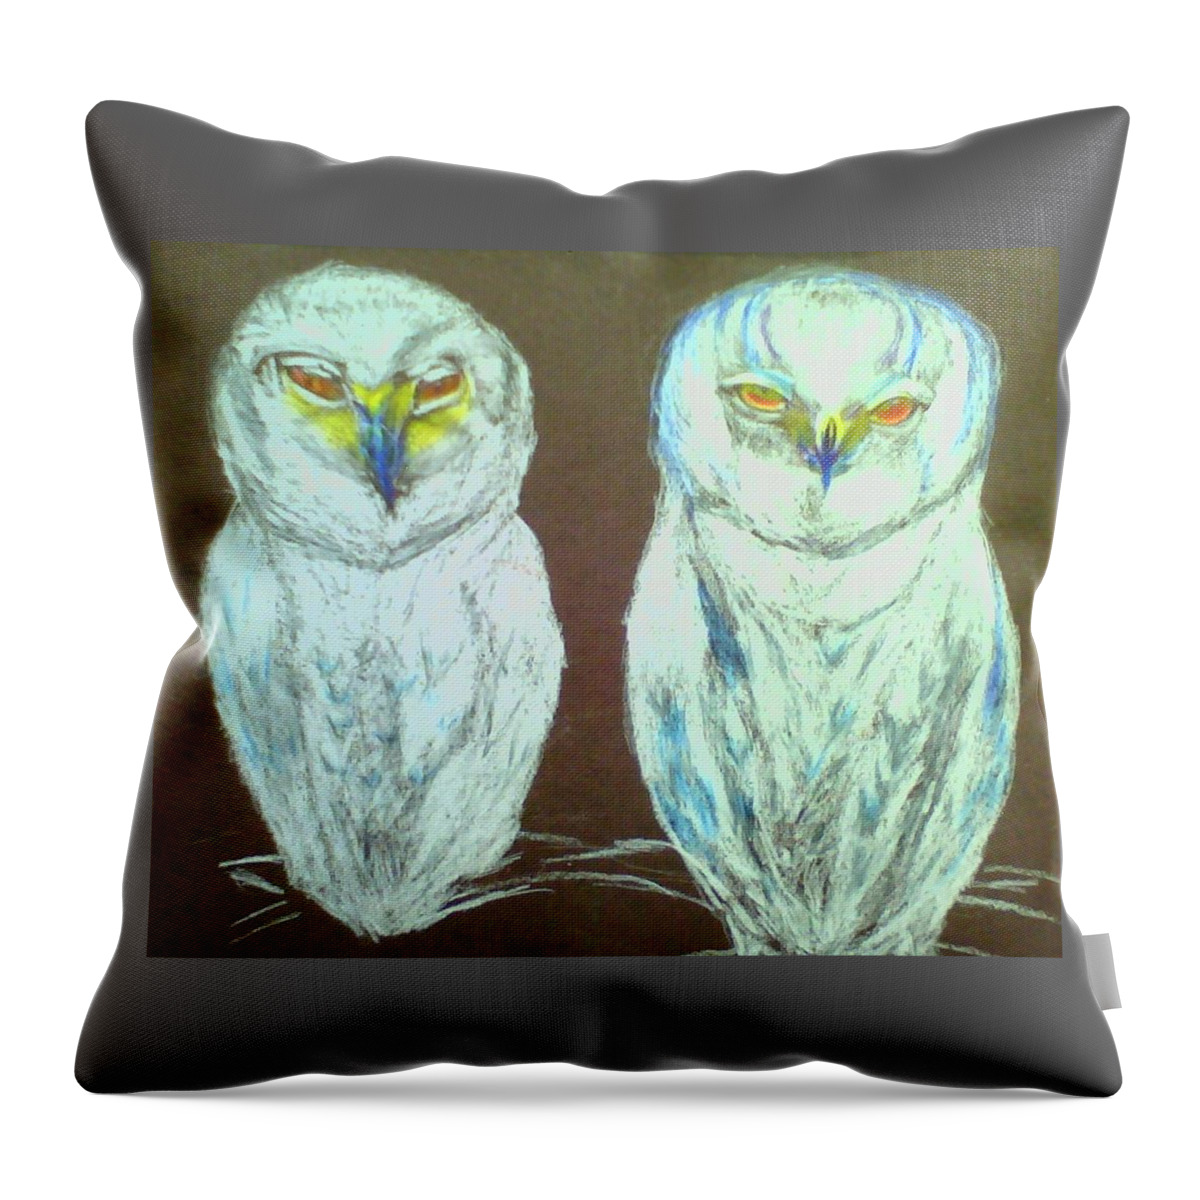 Snow Owls Throw Pillow featuring the drawing Snow Birds by Suzanne Berthier